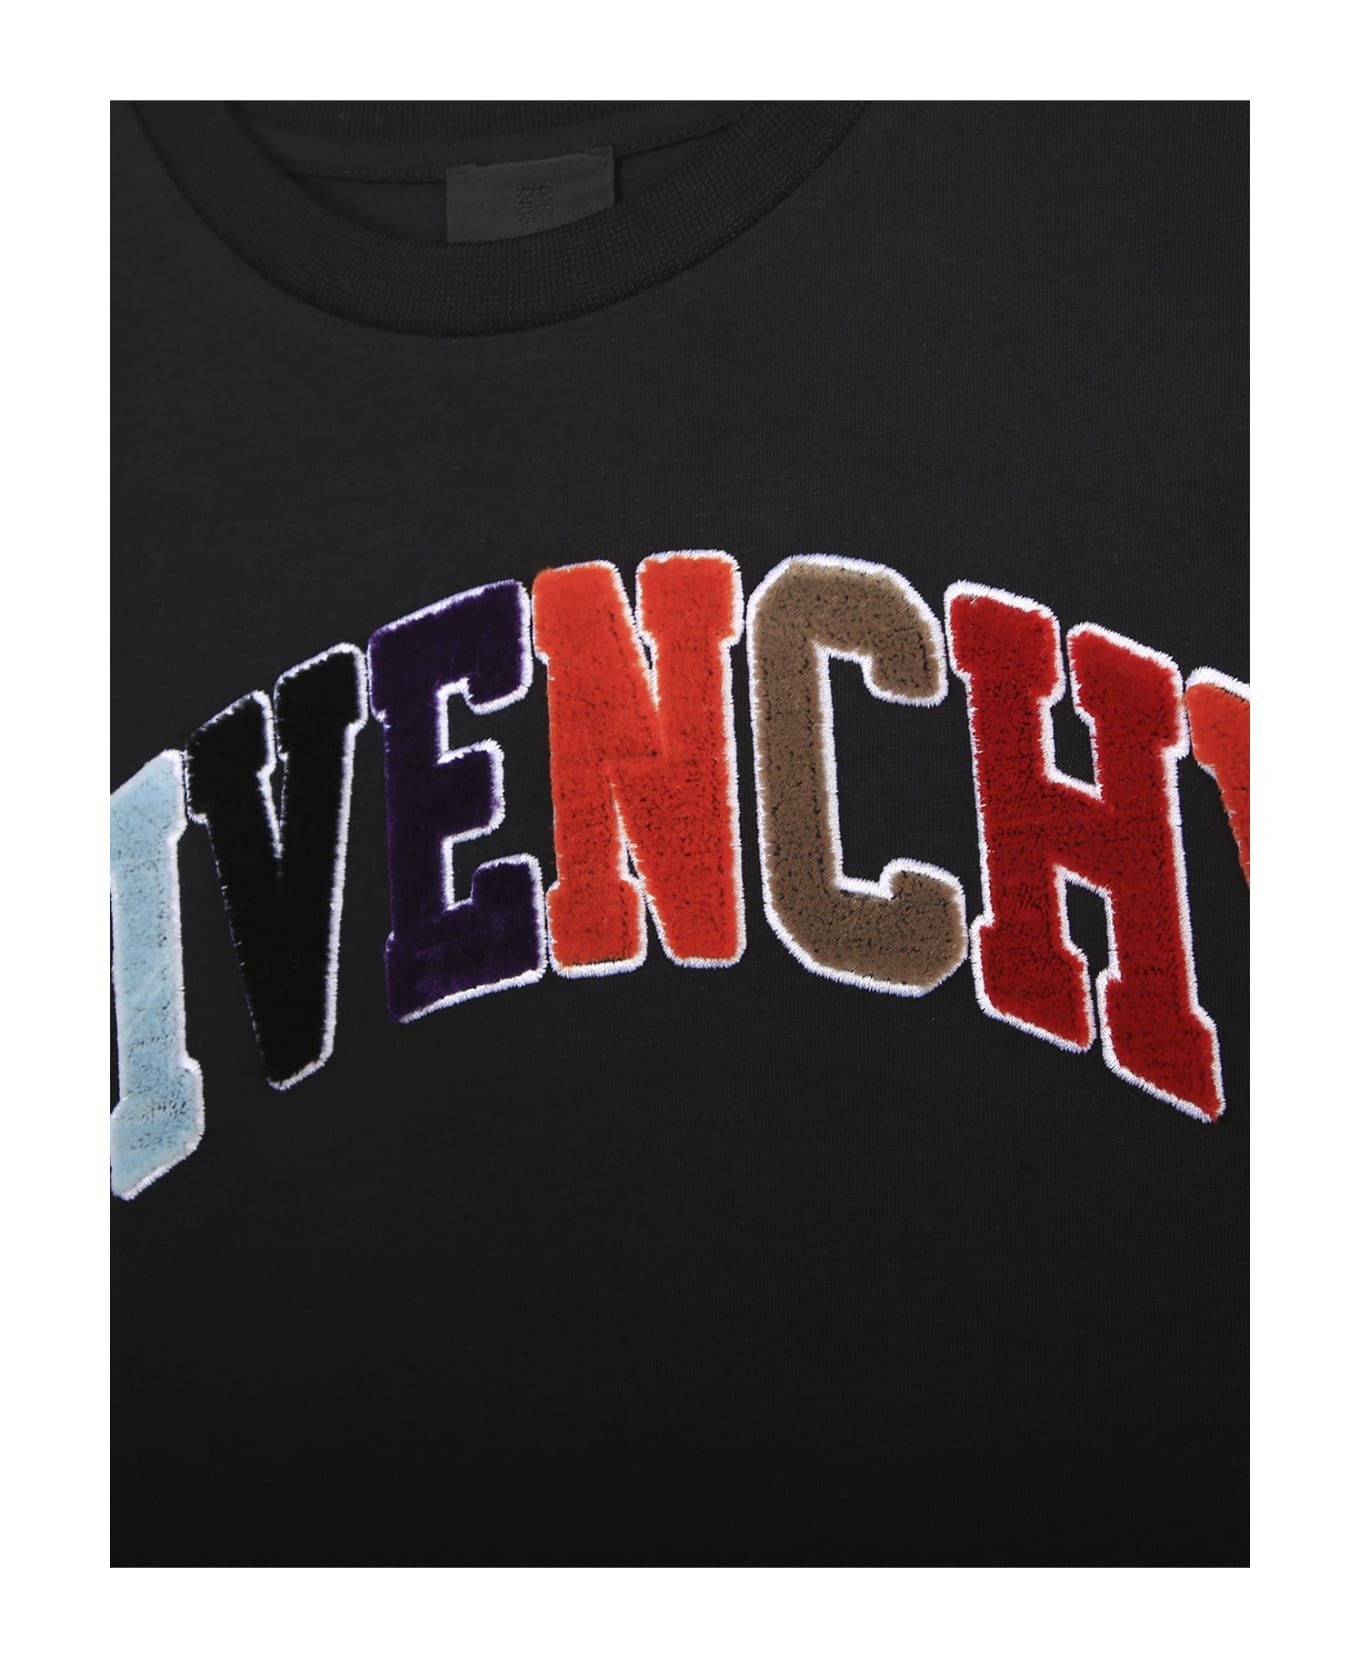 Givenchy Black T-shirt With Multicoloured Signature - Black